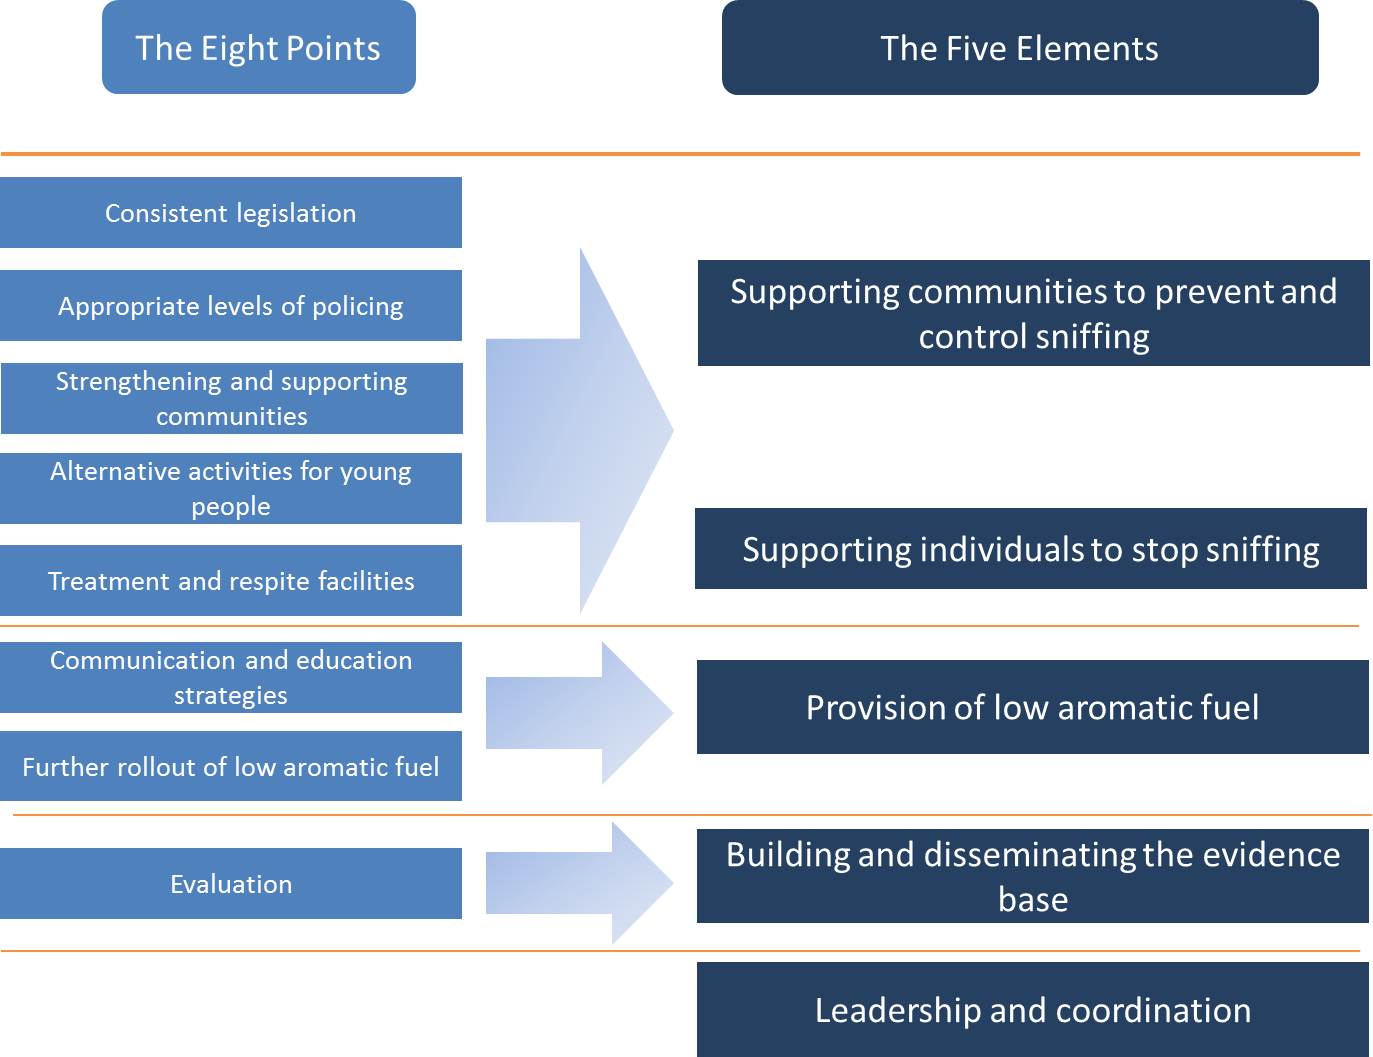 the relationship of the existing eight points to the new structure is shown in figure 6. it is important to note that the new elements are broader and are designed to encompass a wider range of issues and approaches than the current points. the inclusion of existing points does not fully define the new elements, and a number of the ‘eight points’ relate to more than one element. for example, while “building and disseminating the evidence base” includes evaluation, it may also include activities such as better practice development. 